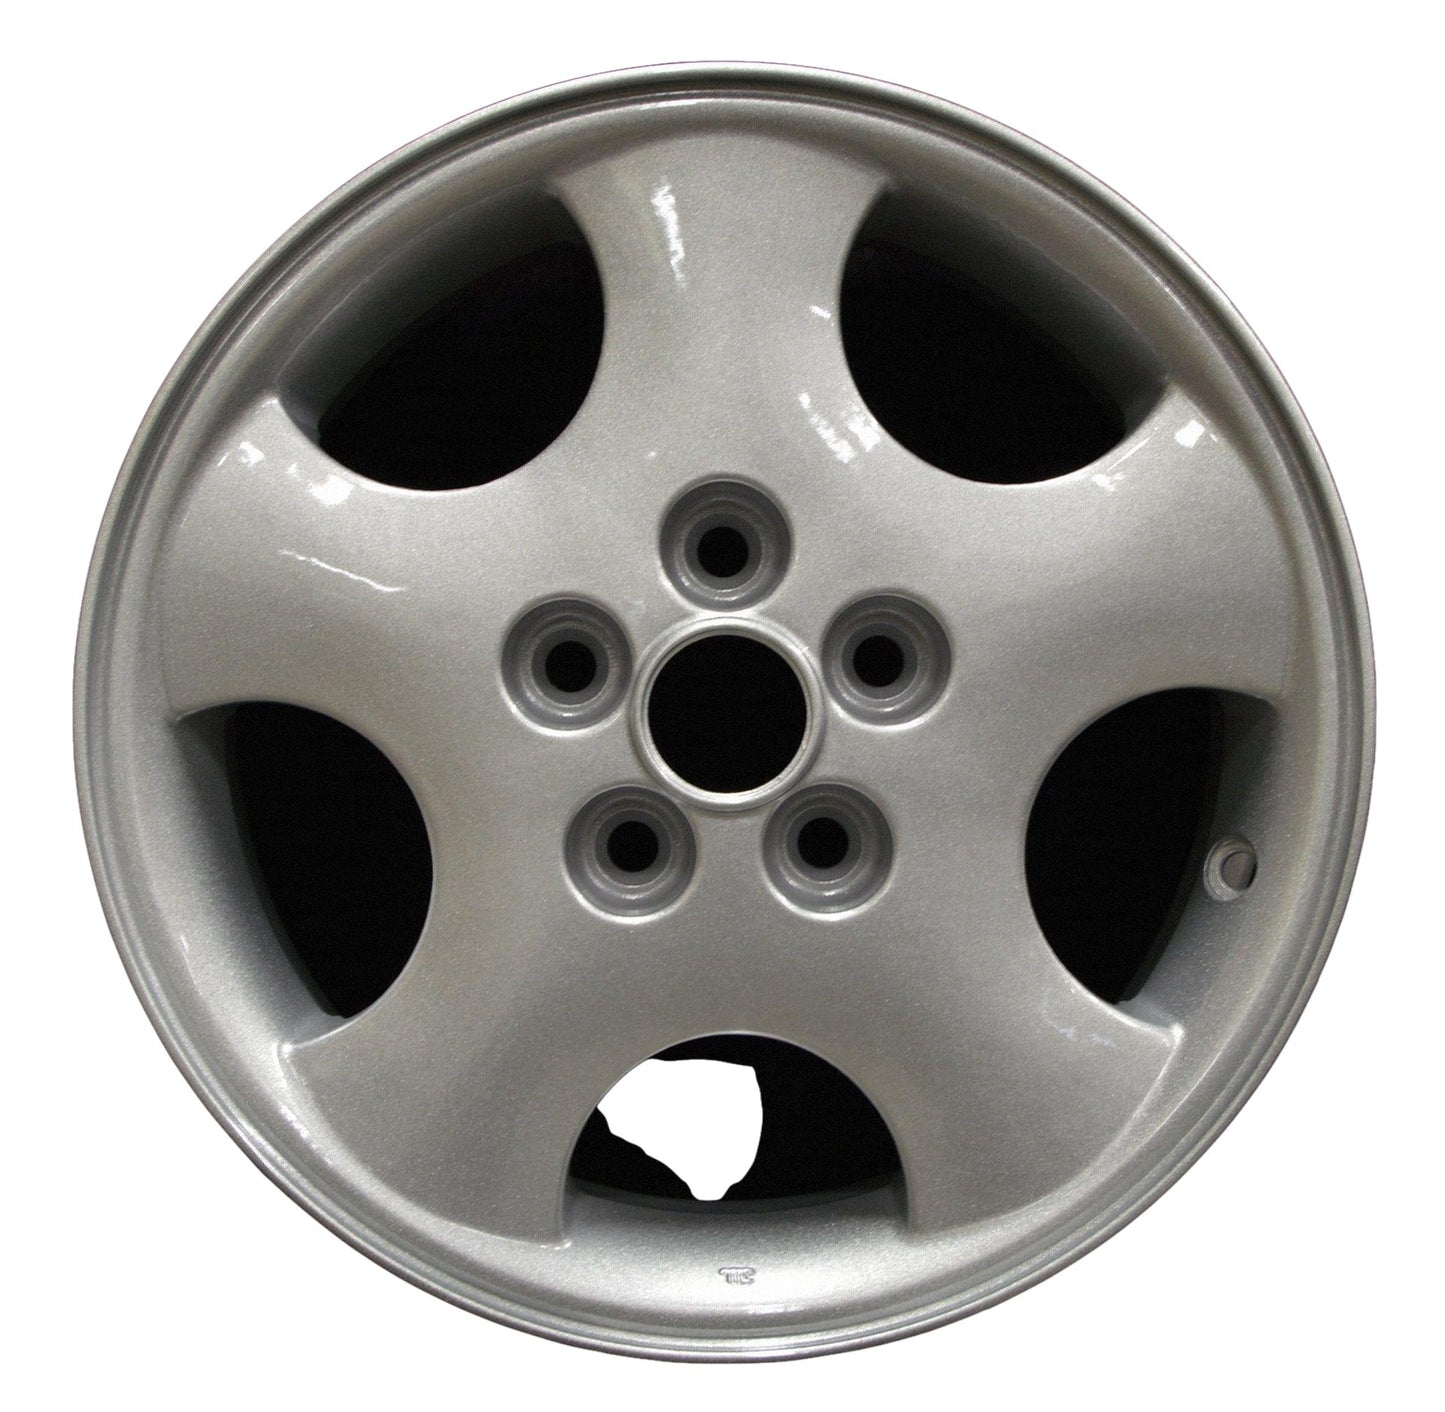 Dodge Neon  1998, 1999 Factory OEM Car Wheel Size 14x6 Alloy WAO.2101A.PS08.FF